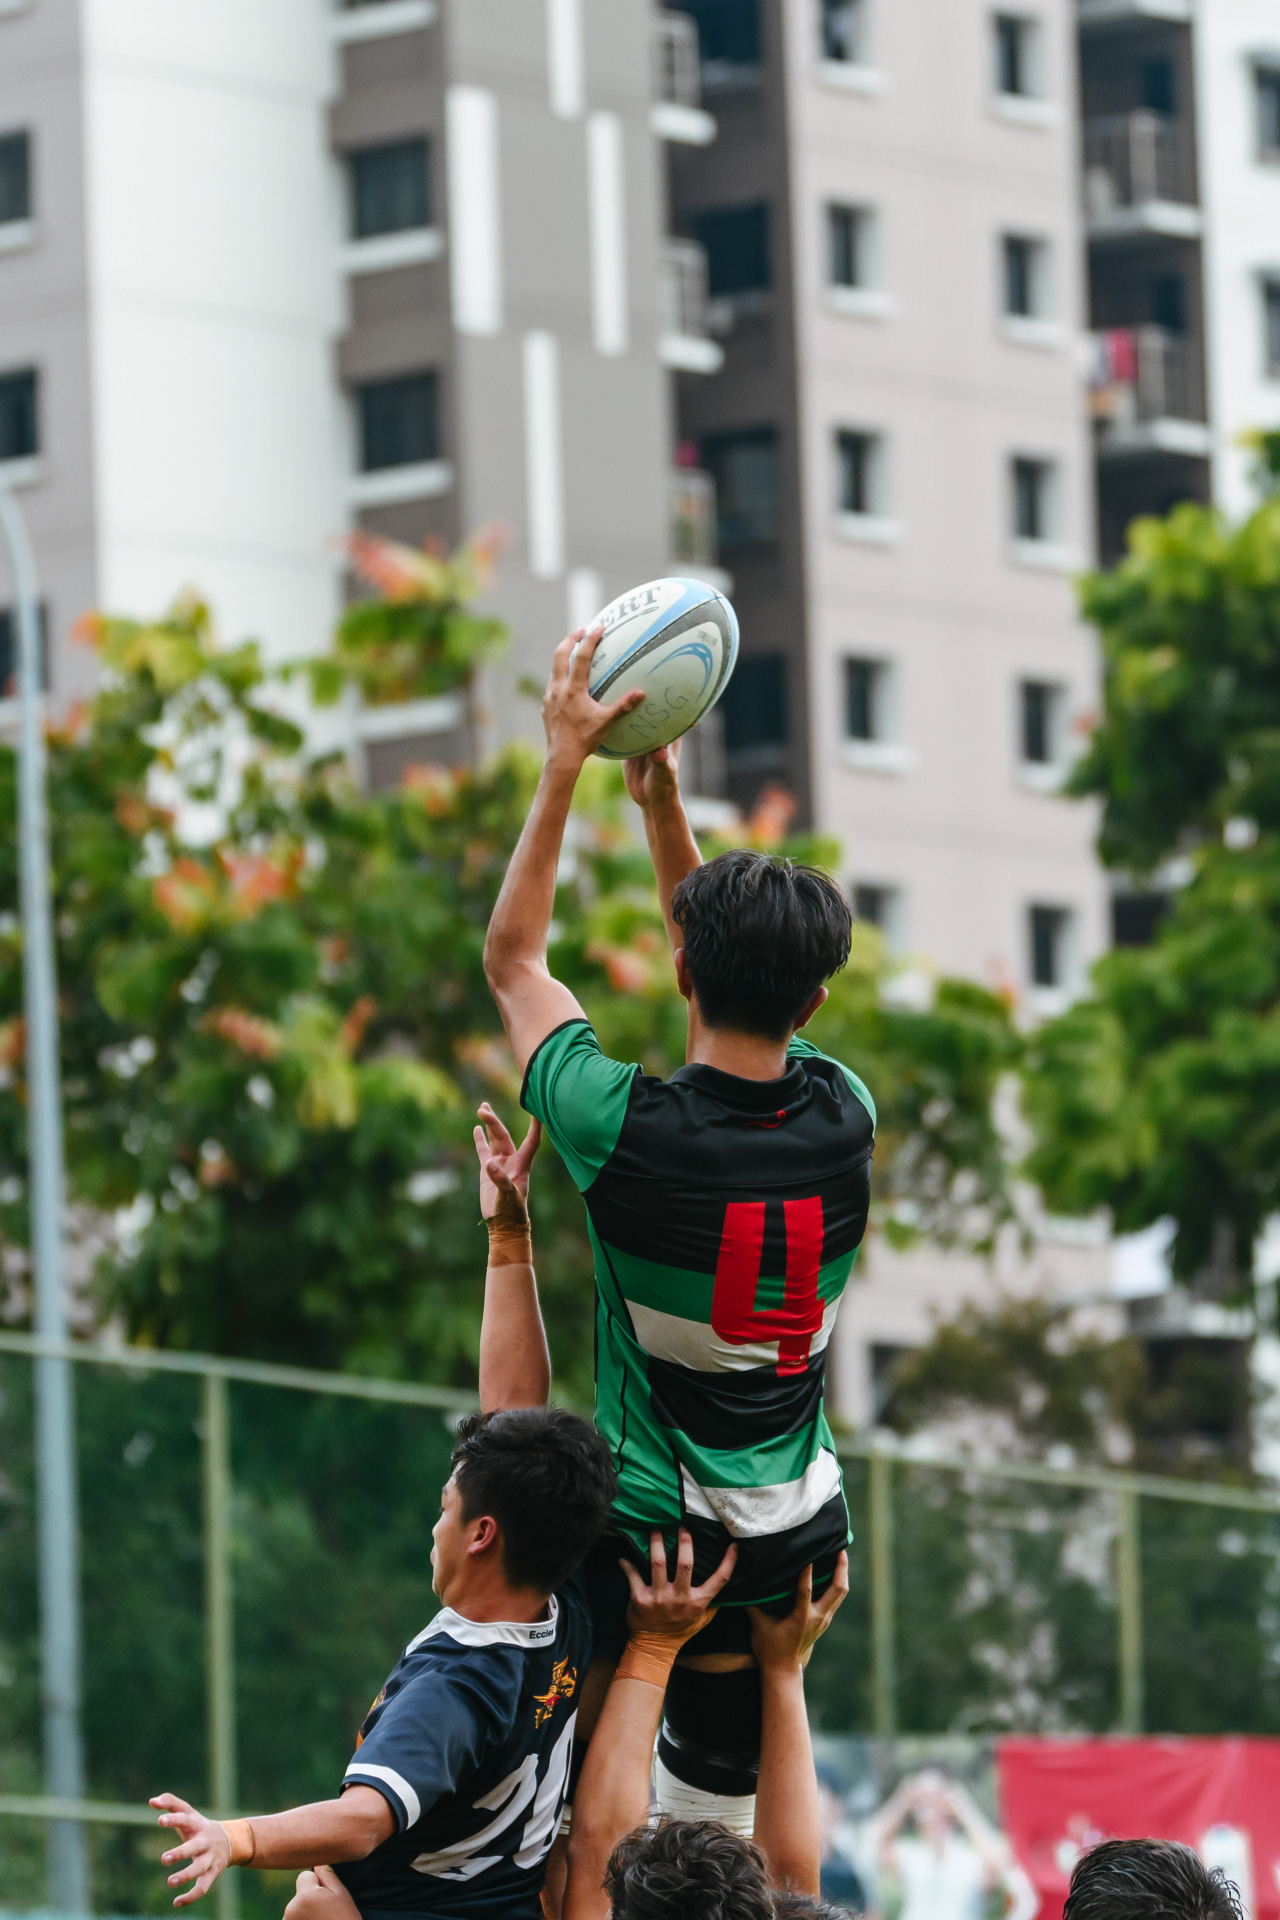 RI’s Peter Huang (#4) rises high to catch the lineout ball. (Photo 5 © Jared Chow/Red Sports)